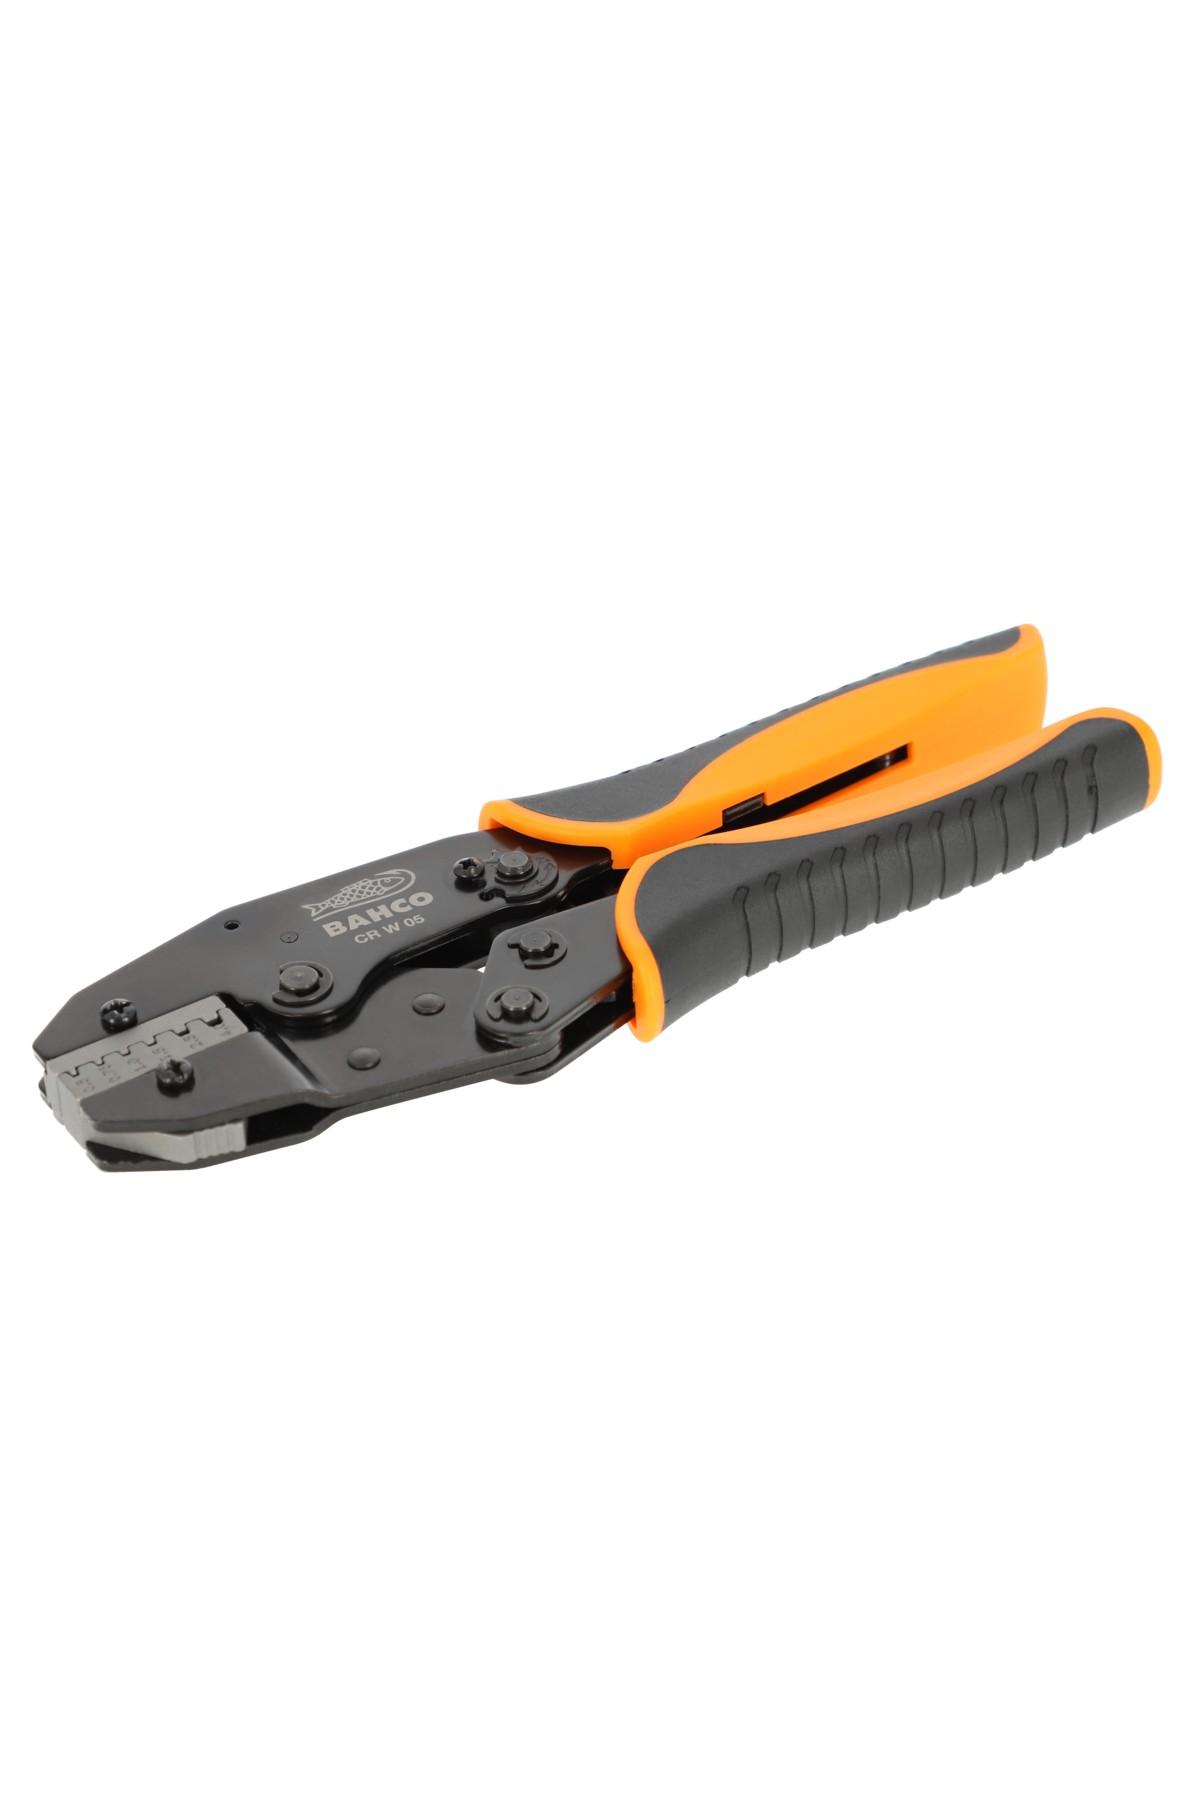 Crimping pliers with ratchet function for tubular connectors 0.5 AWG-4.0 AWG